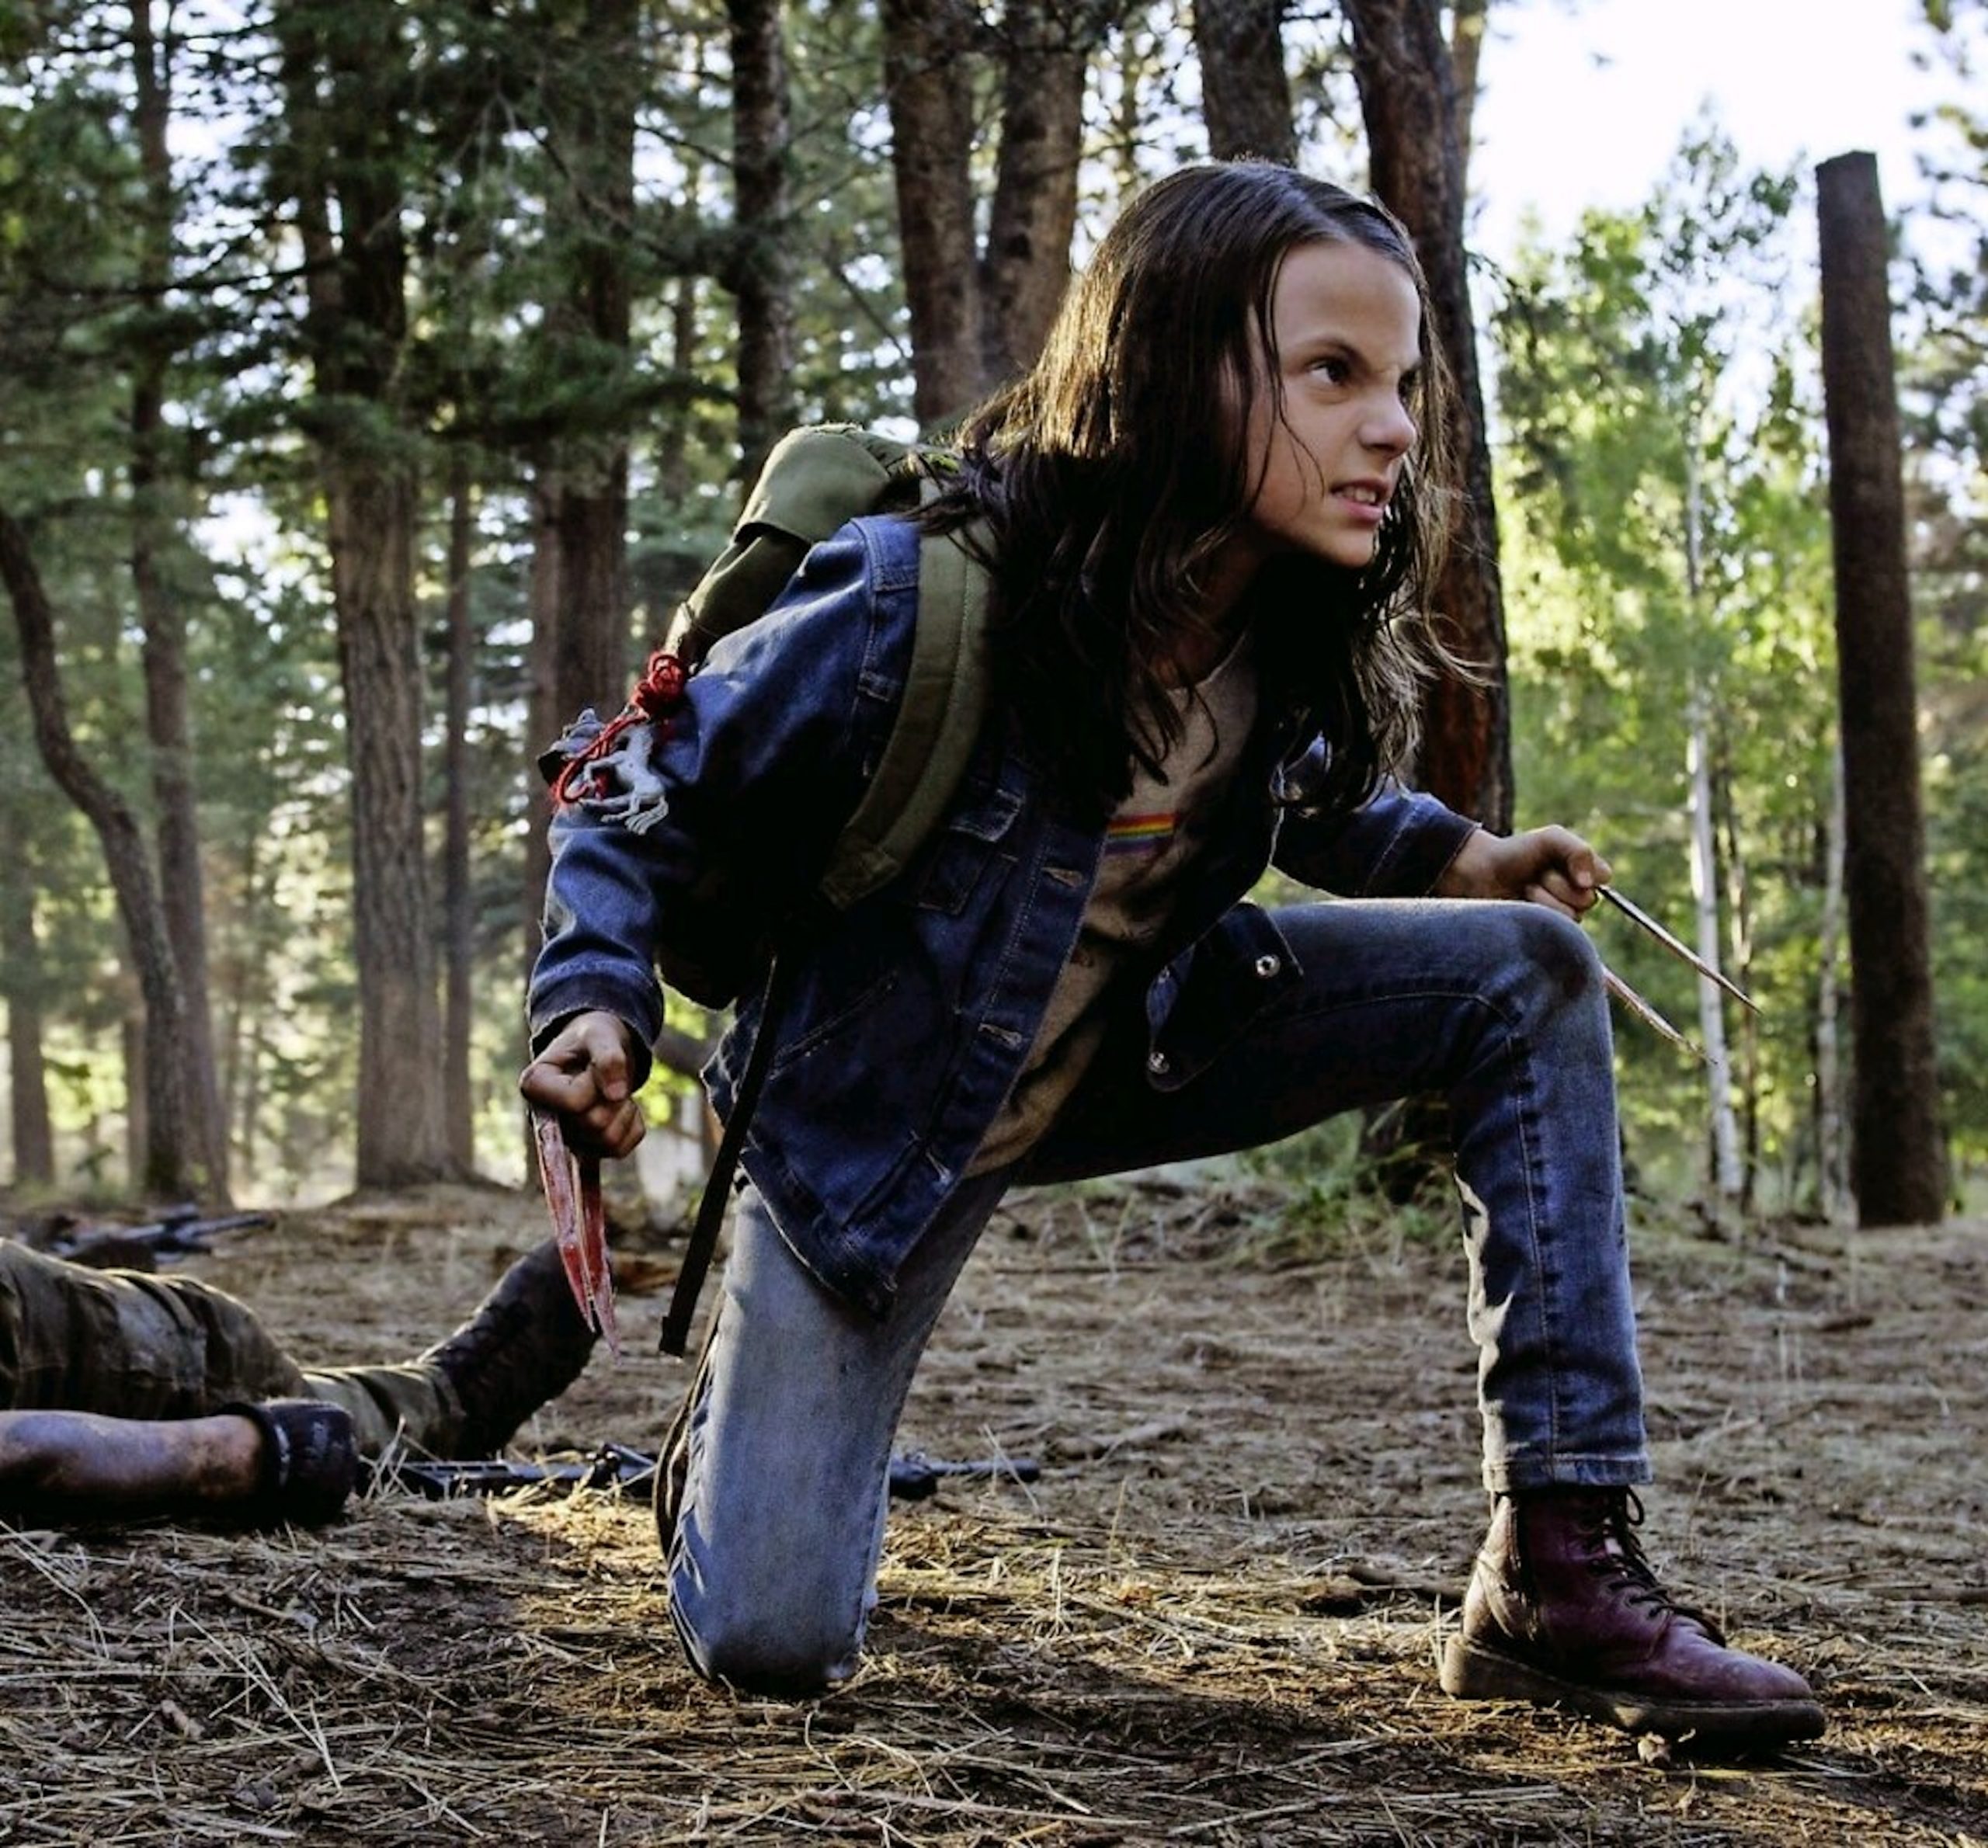 Barside Buzz says Dafne Keen was approached pre-strikes for a Deadpool 3 return as X23, plus more Wolverine rumors regarding the sequel.